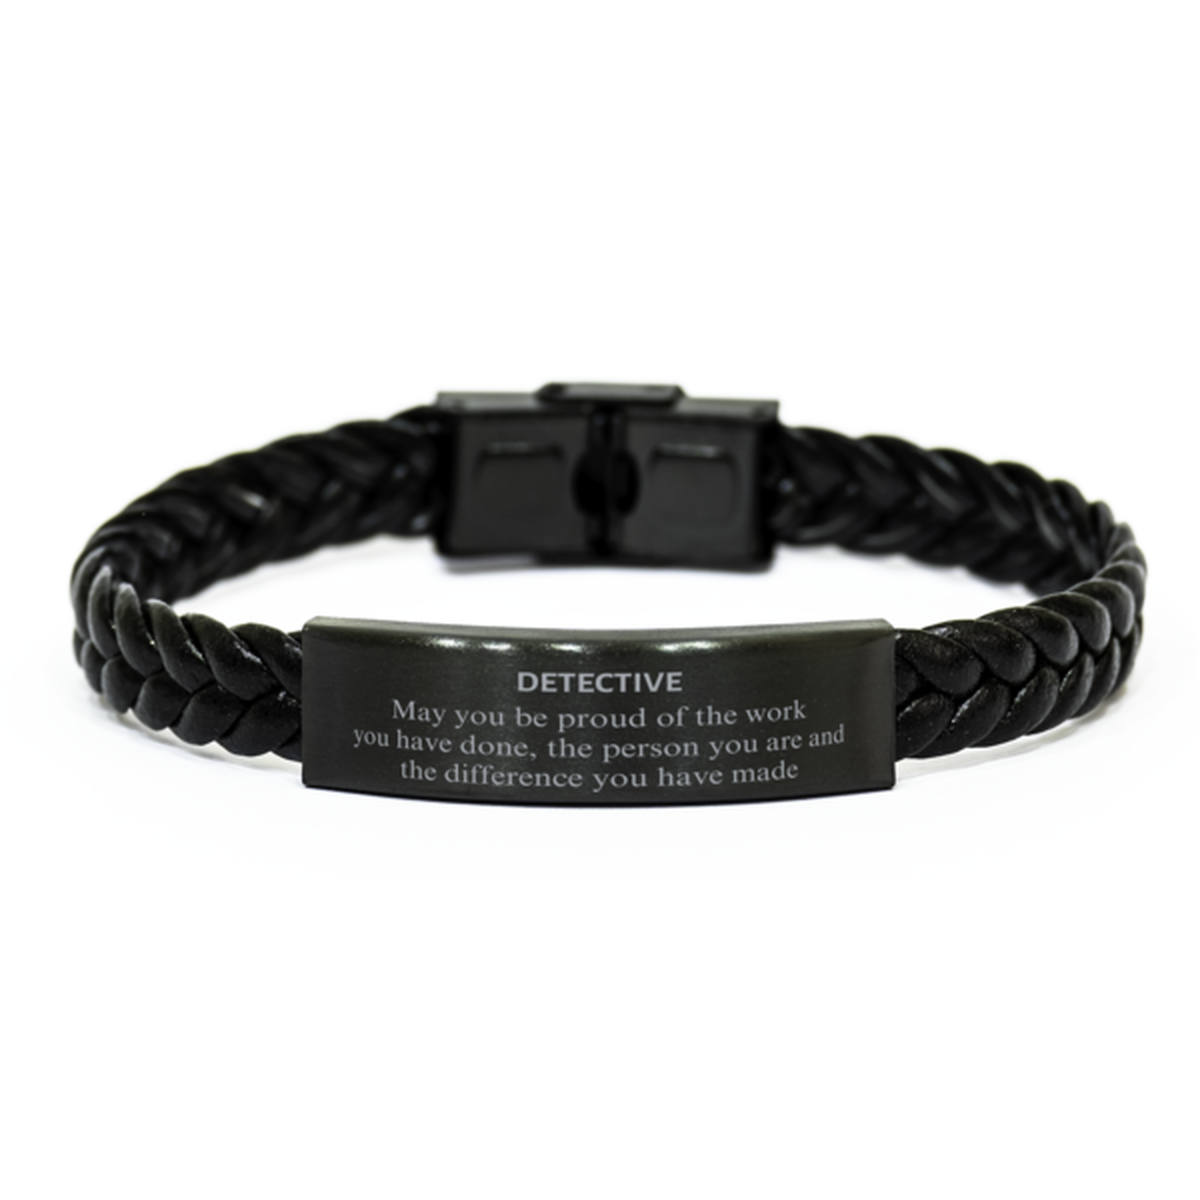 Detective May you be proud of the work you have done, Retirement Detective Braided Leather Bracelet for Colleague Appreciation Gifts Amazing for Detective